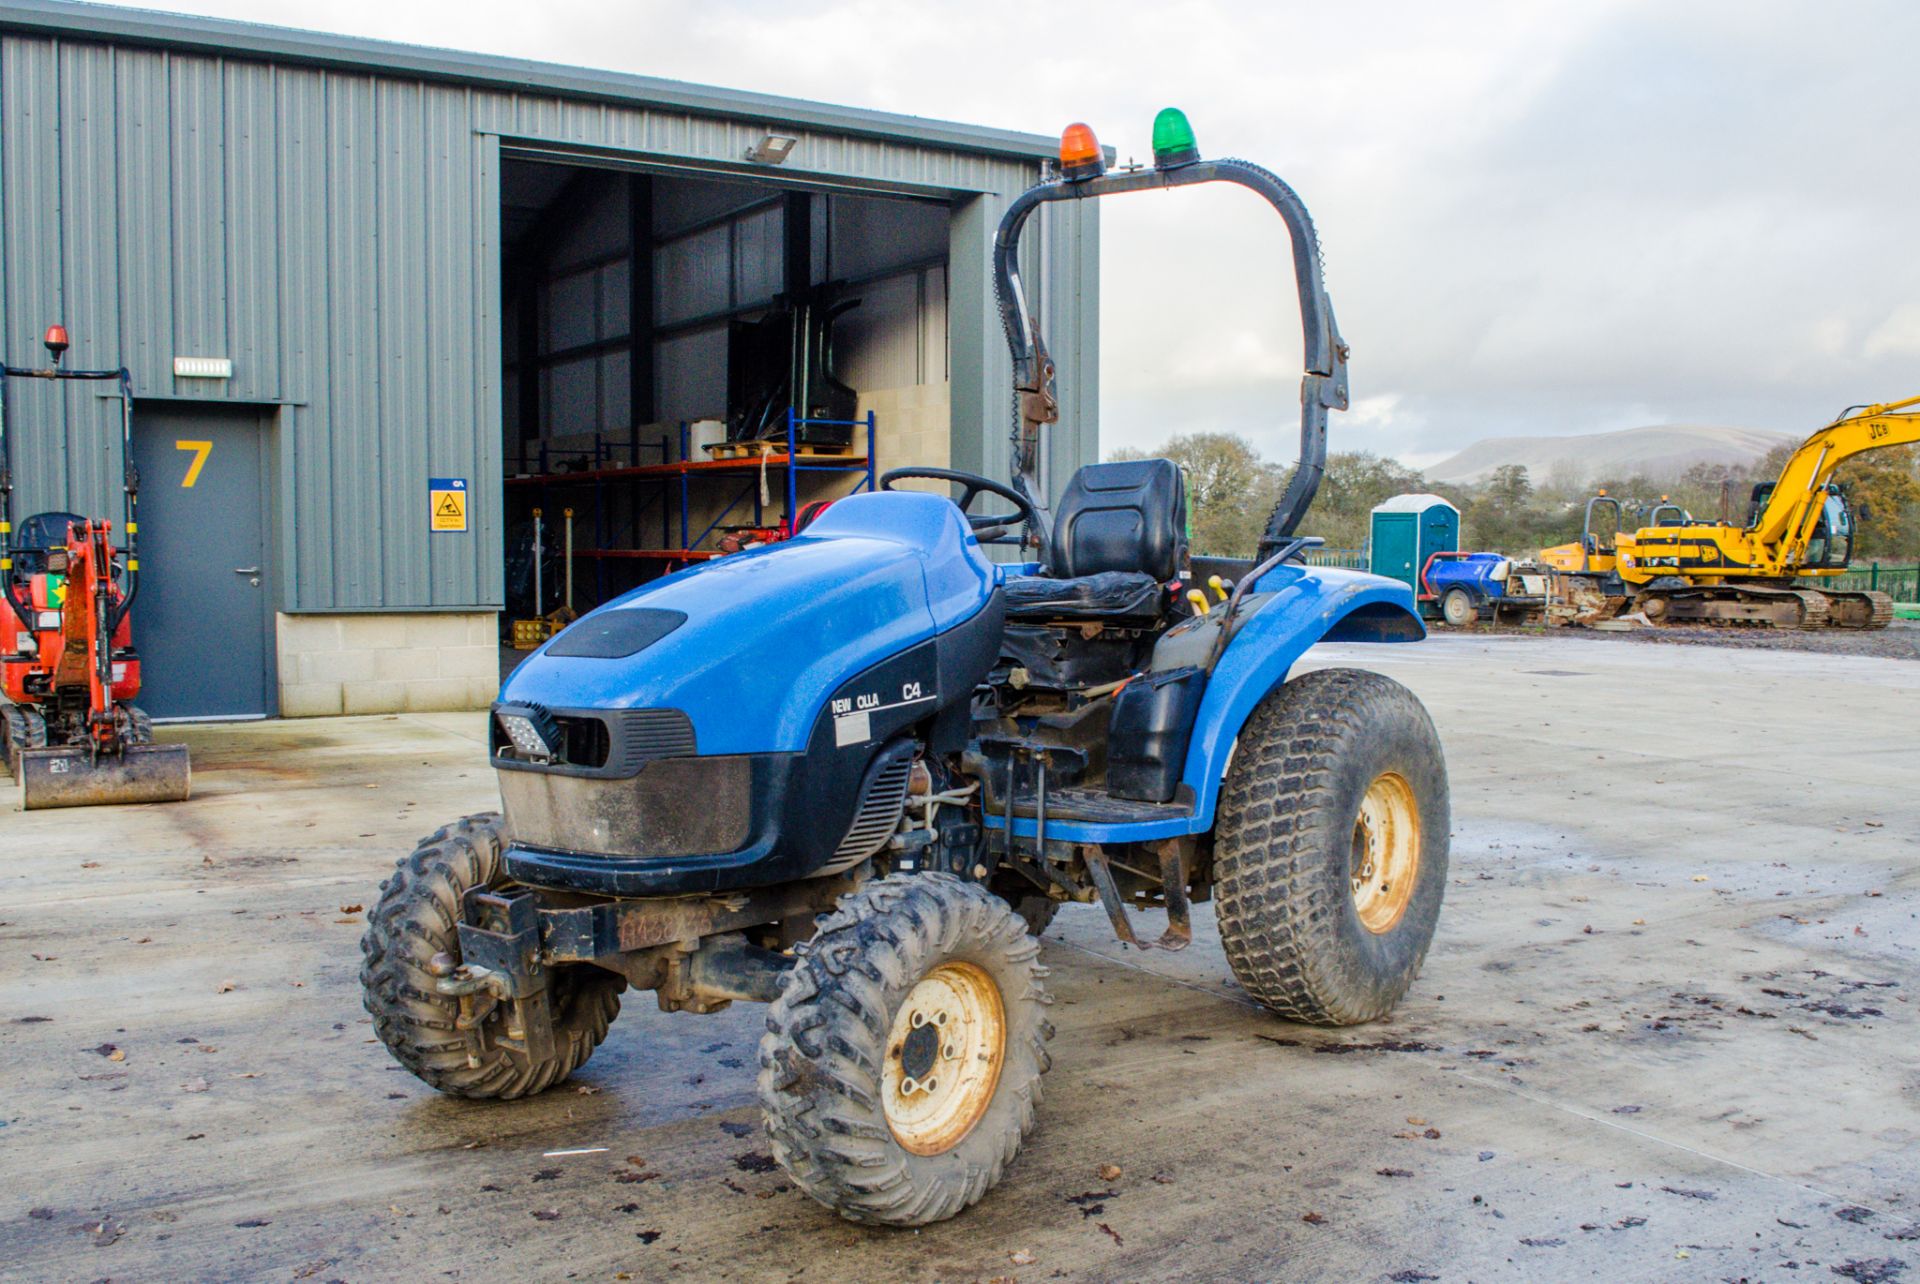 New Holland TC400 4wd diesel tractor Year: 2007 S/N: GBB525841 Recorded Hours: 2121 A438233